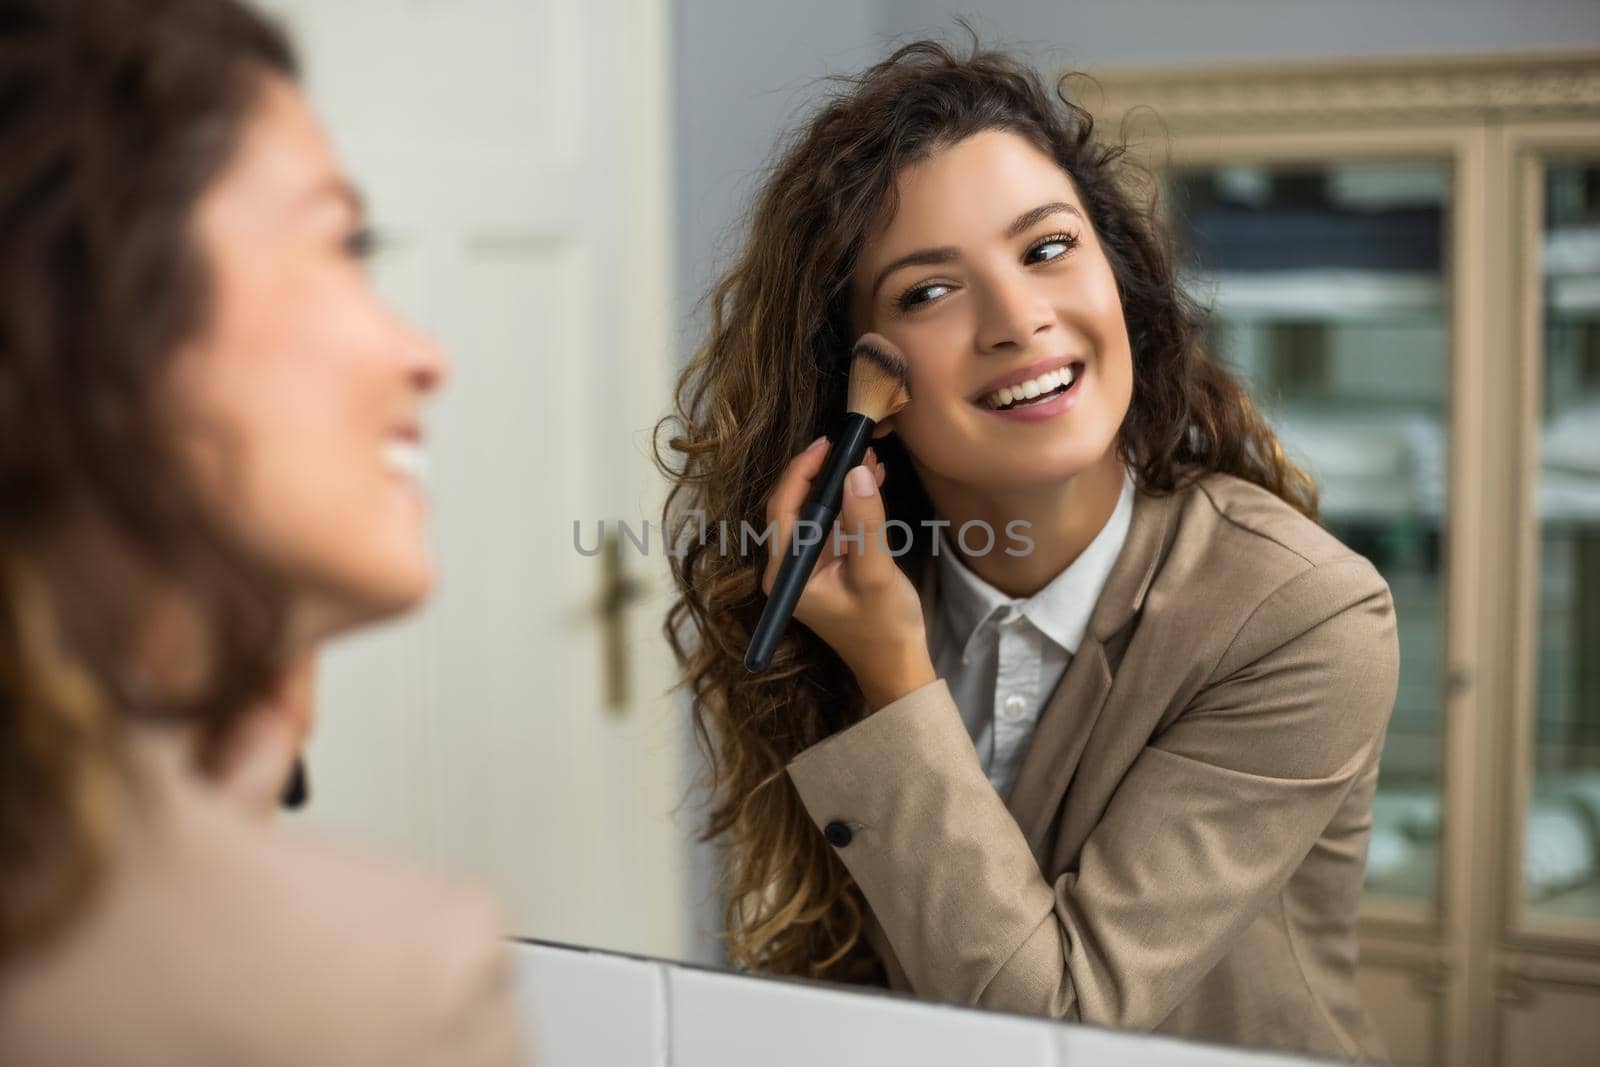 Businesswoman is applying blush while preparing for work.